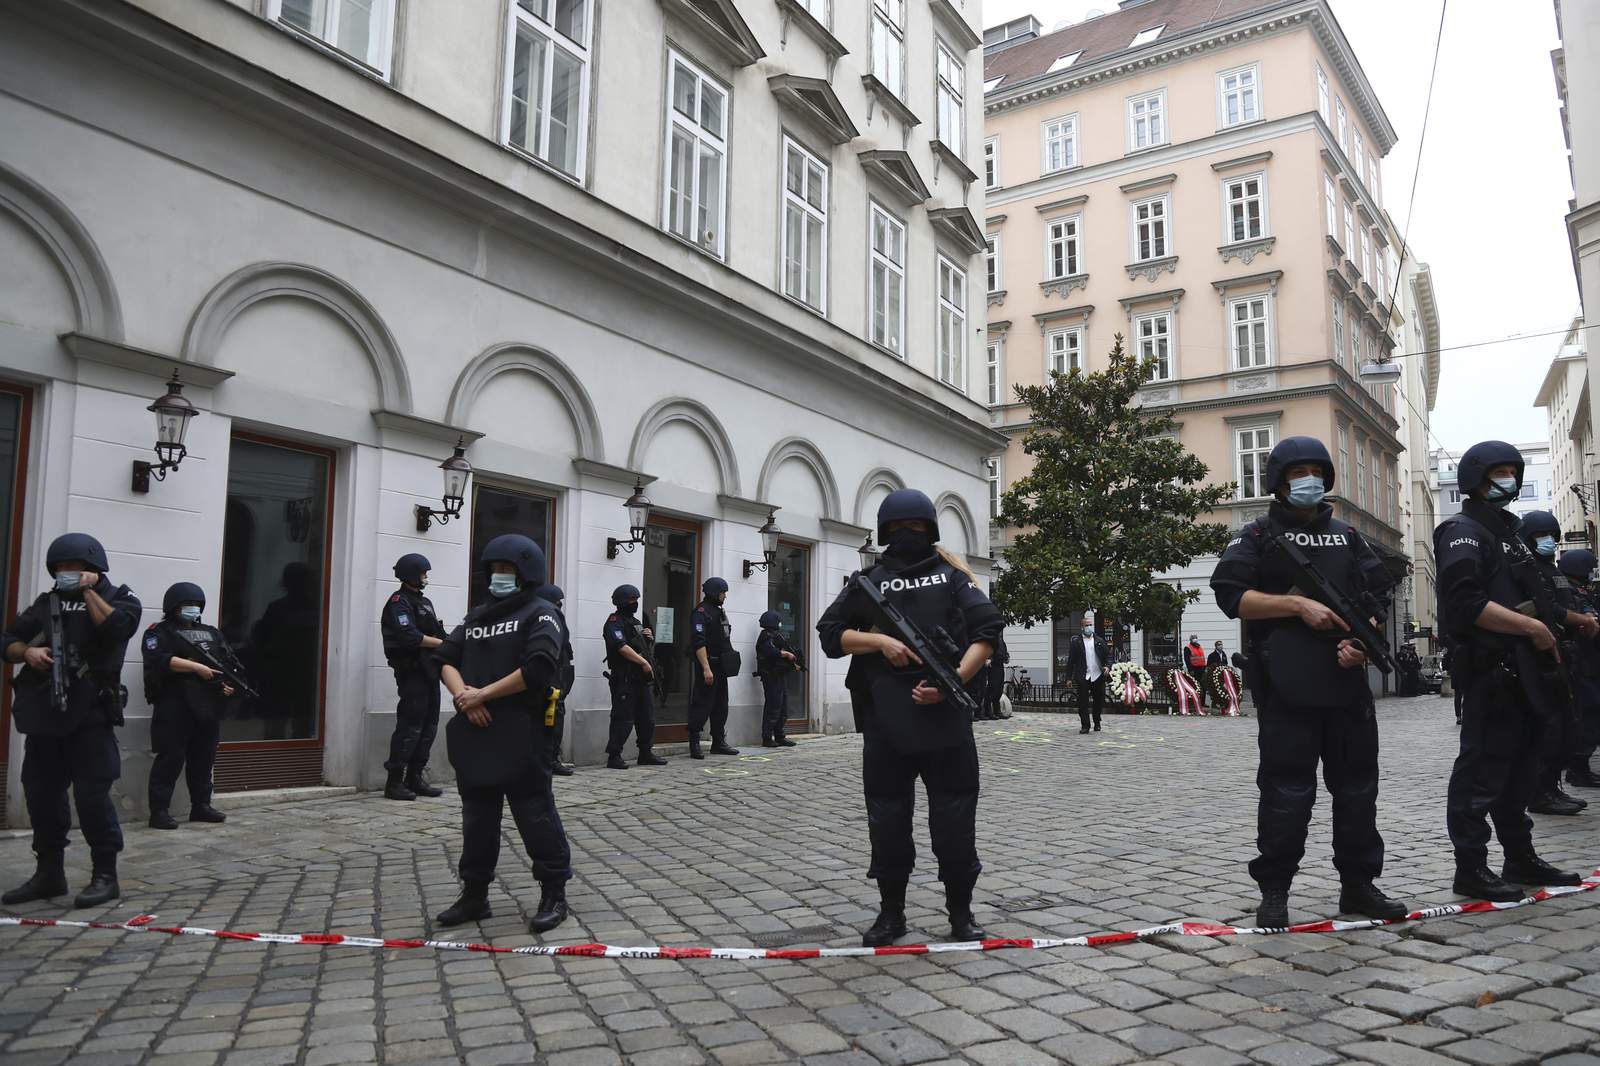 Gunman who killed 4 in Vienna attack had sought to join IS